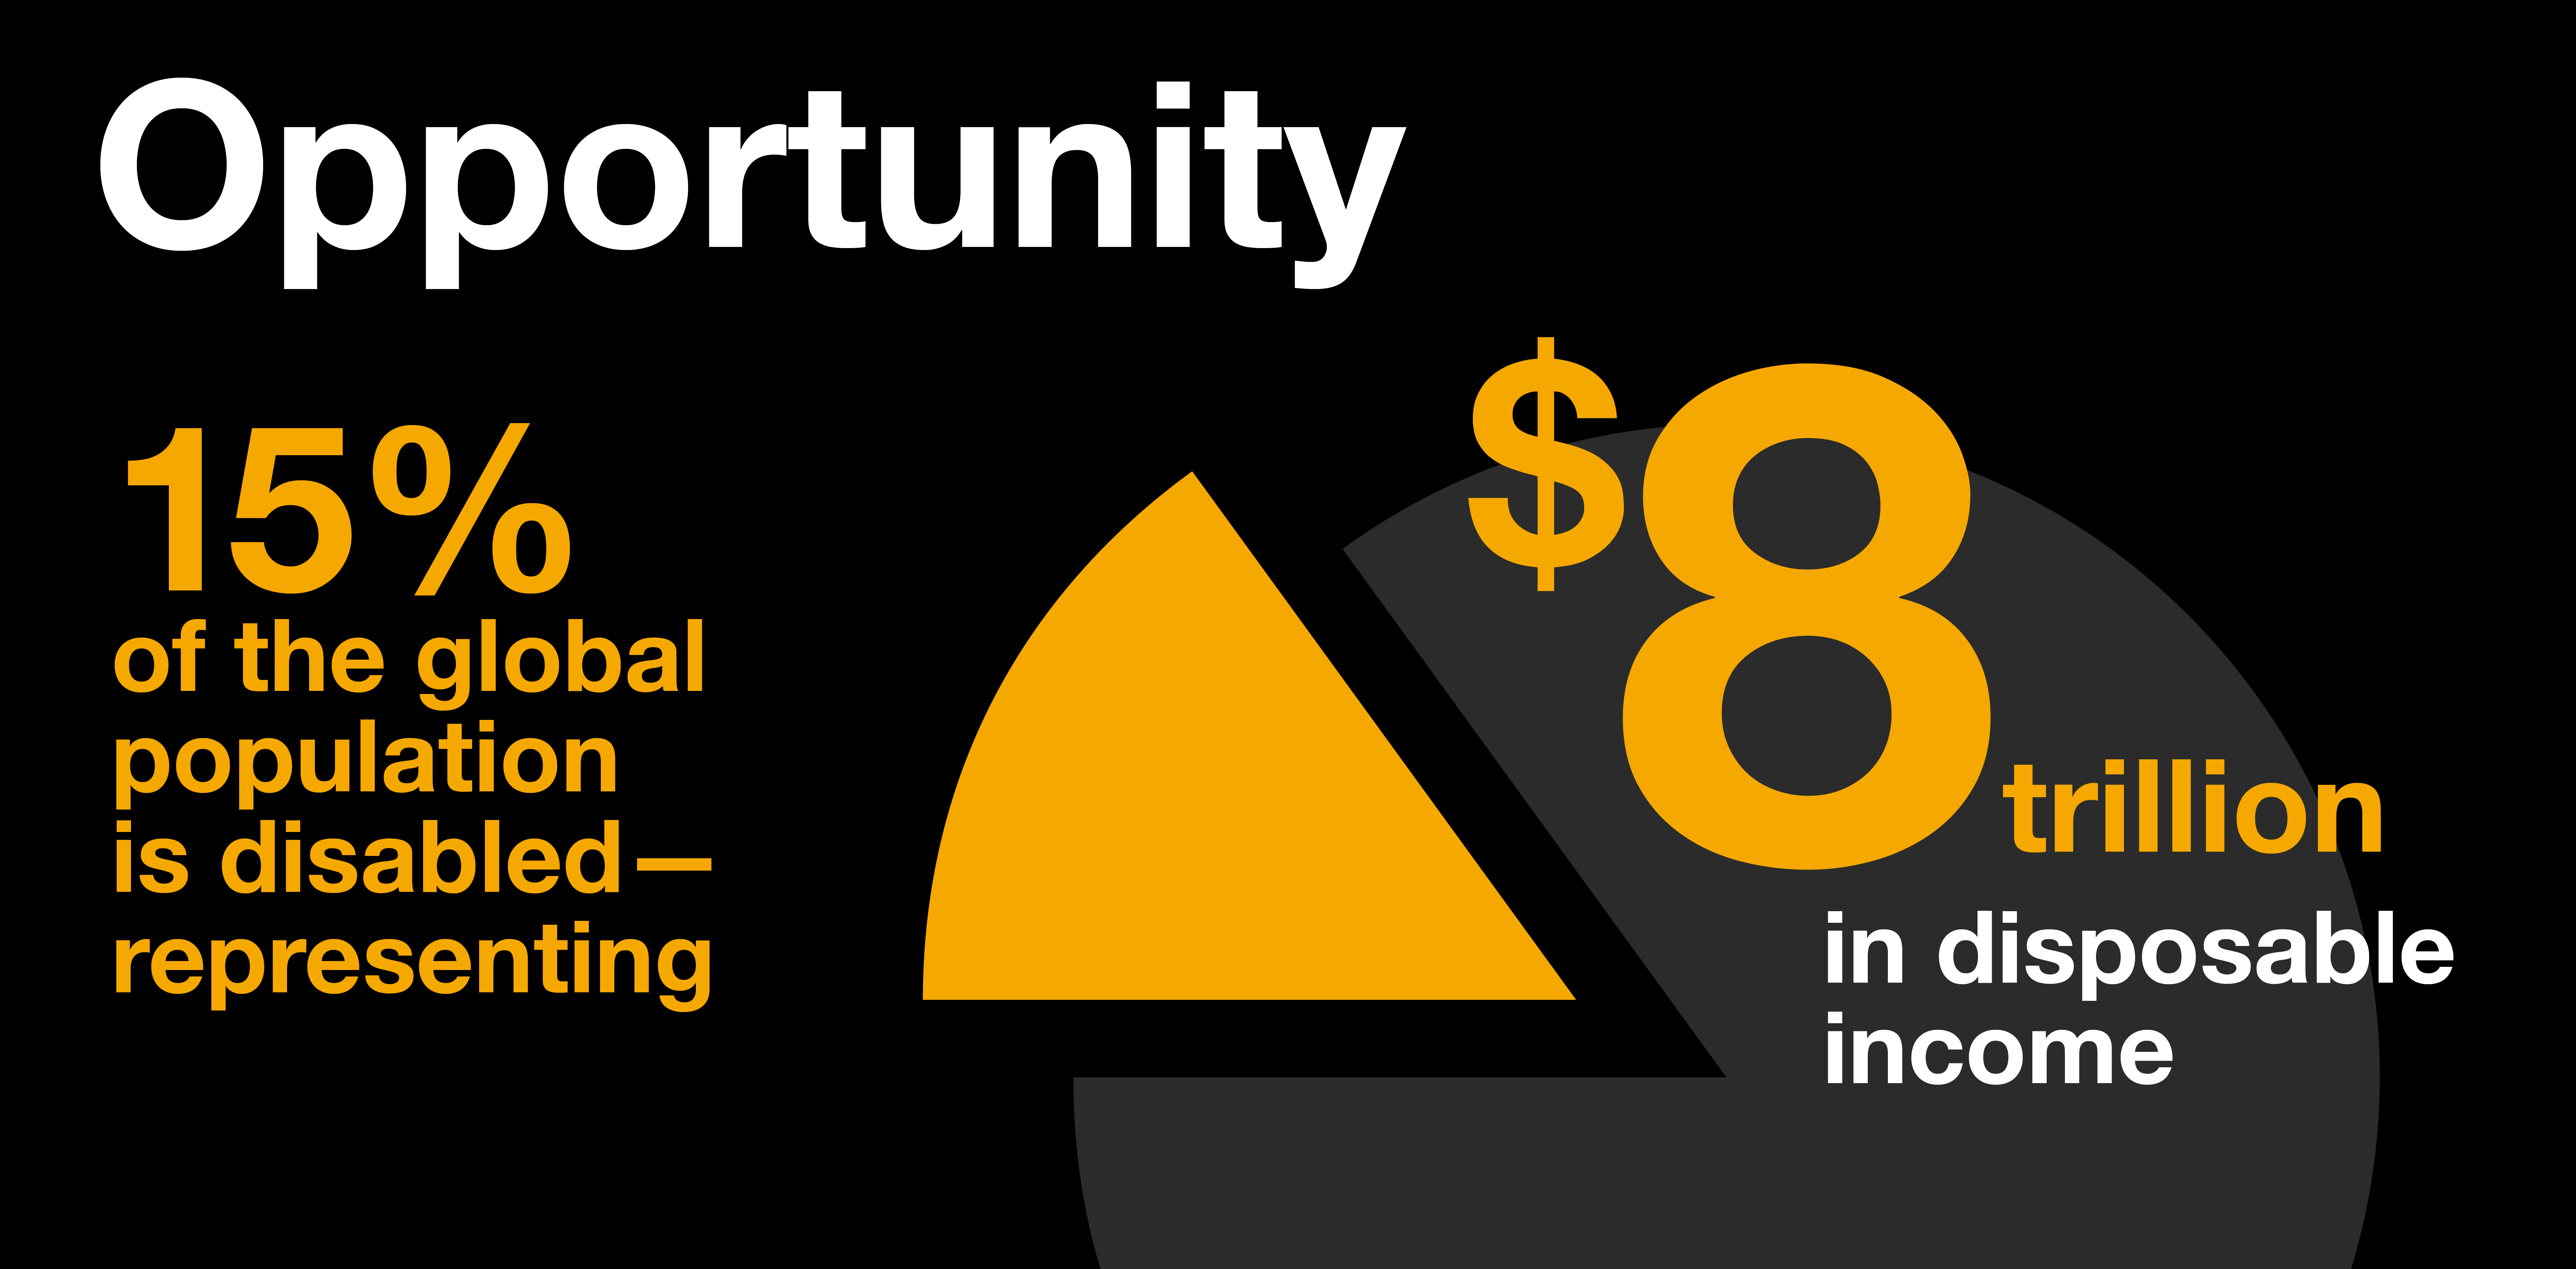 Opportunity infographic displaying 15% of global population has a disability that represents $8 trillion in disposable income.